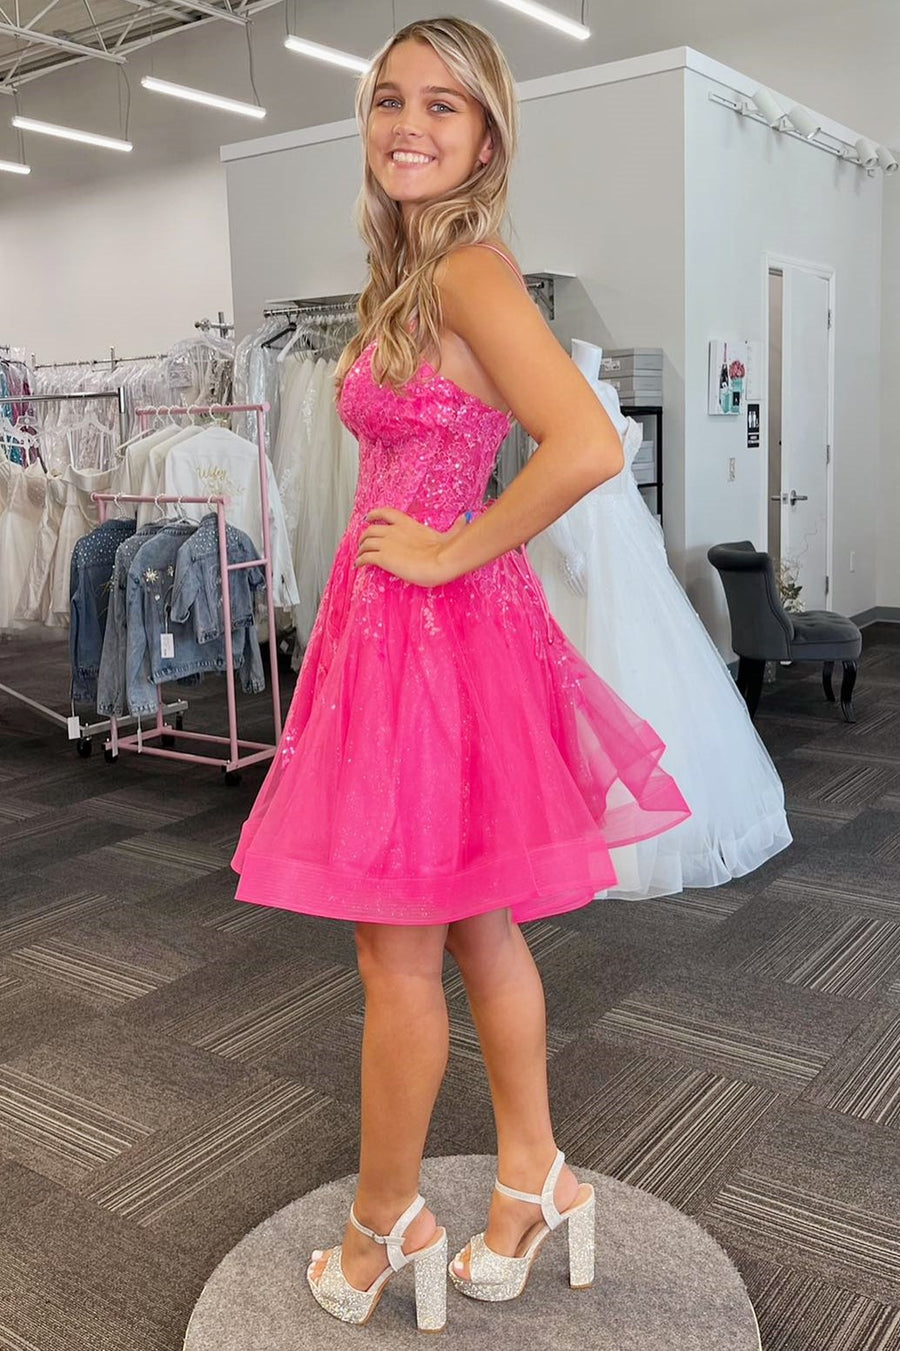 FancyVestido Straps Hot Pink Pleated Short Homecoming Dress with Rhinestones Hot Pink / US 8